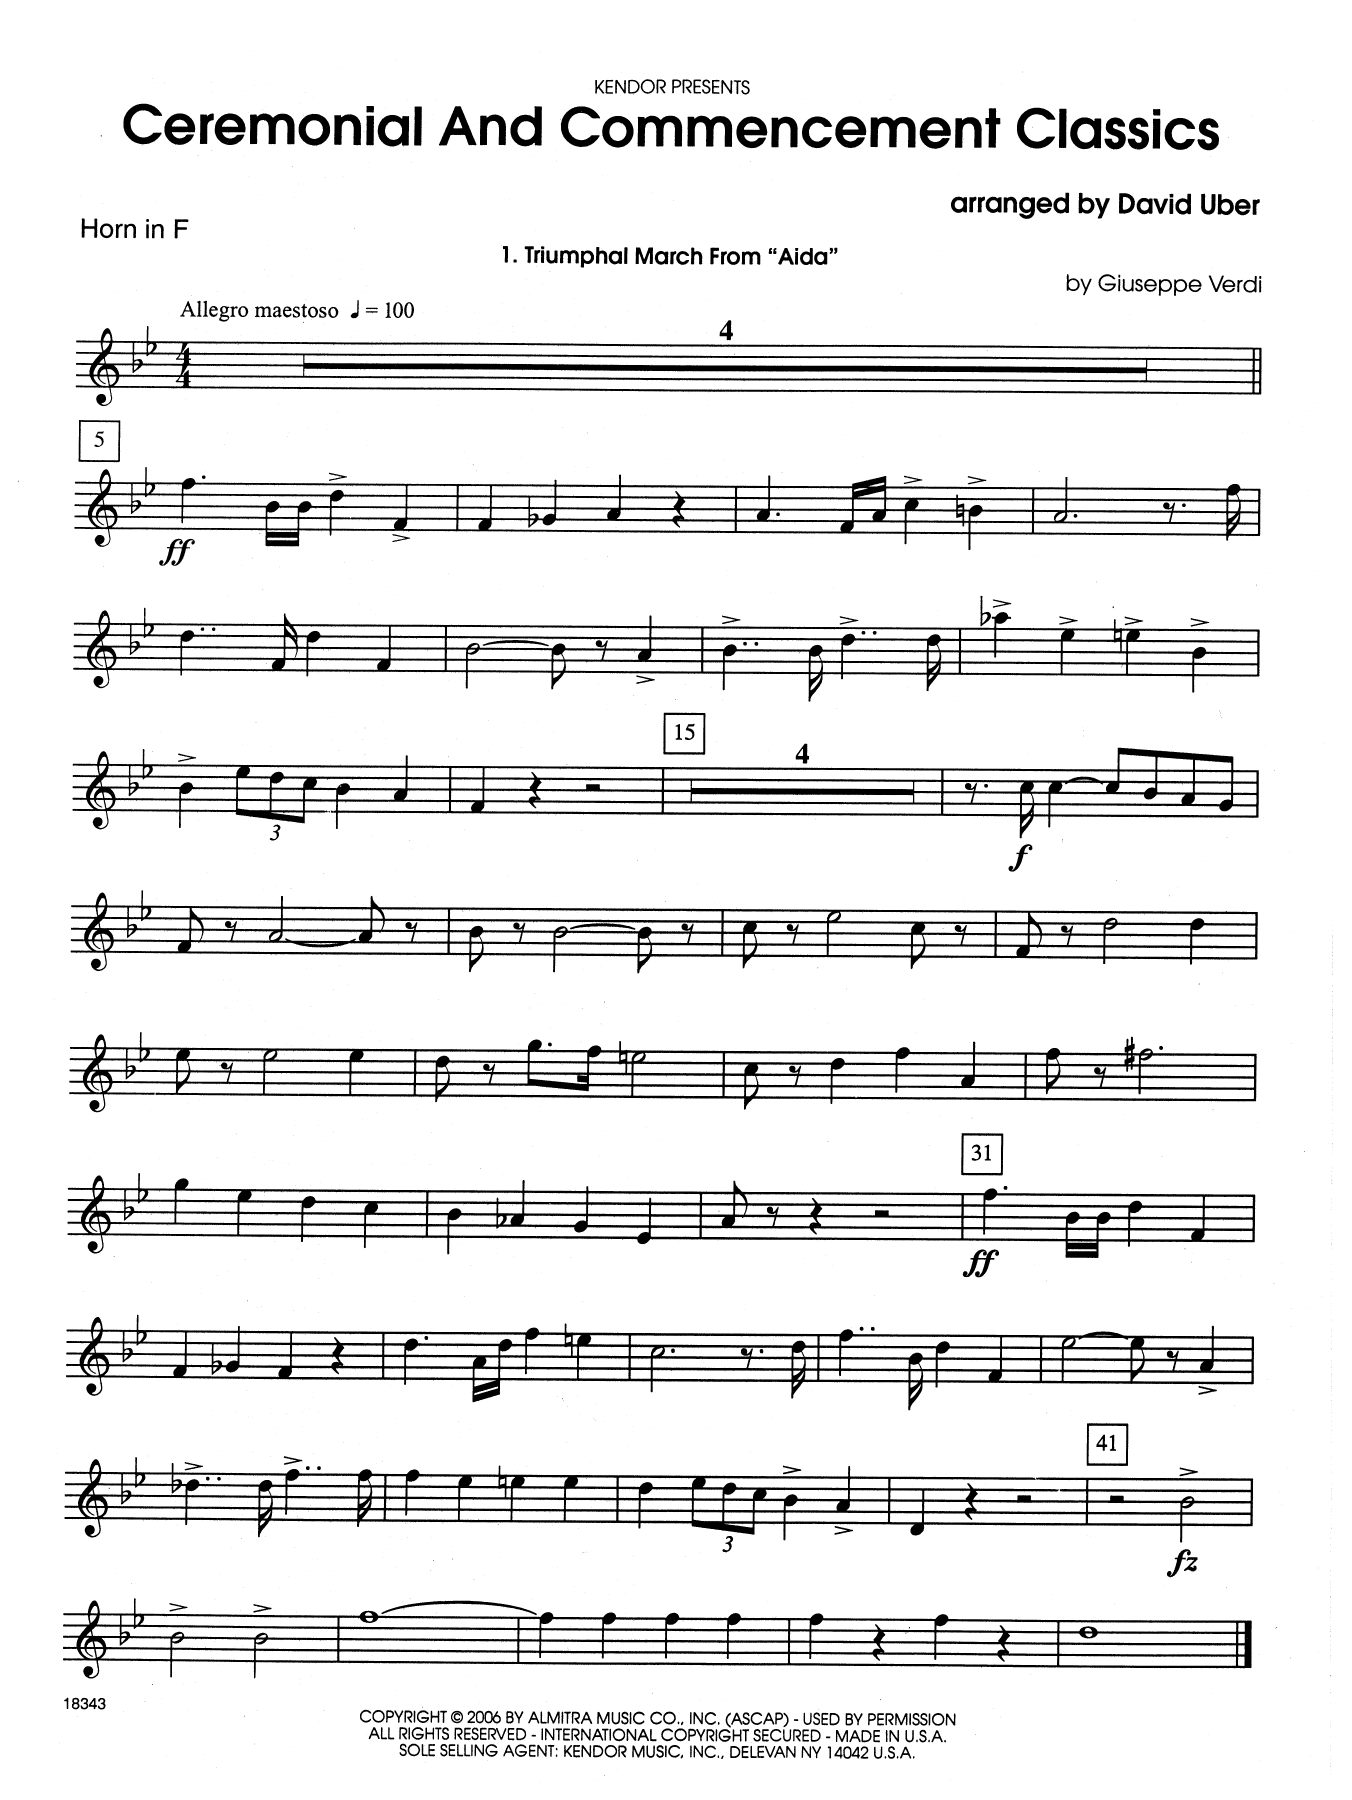 Download David Uber Ceremonial And Commencement Classics - Sheet Music